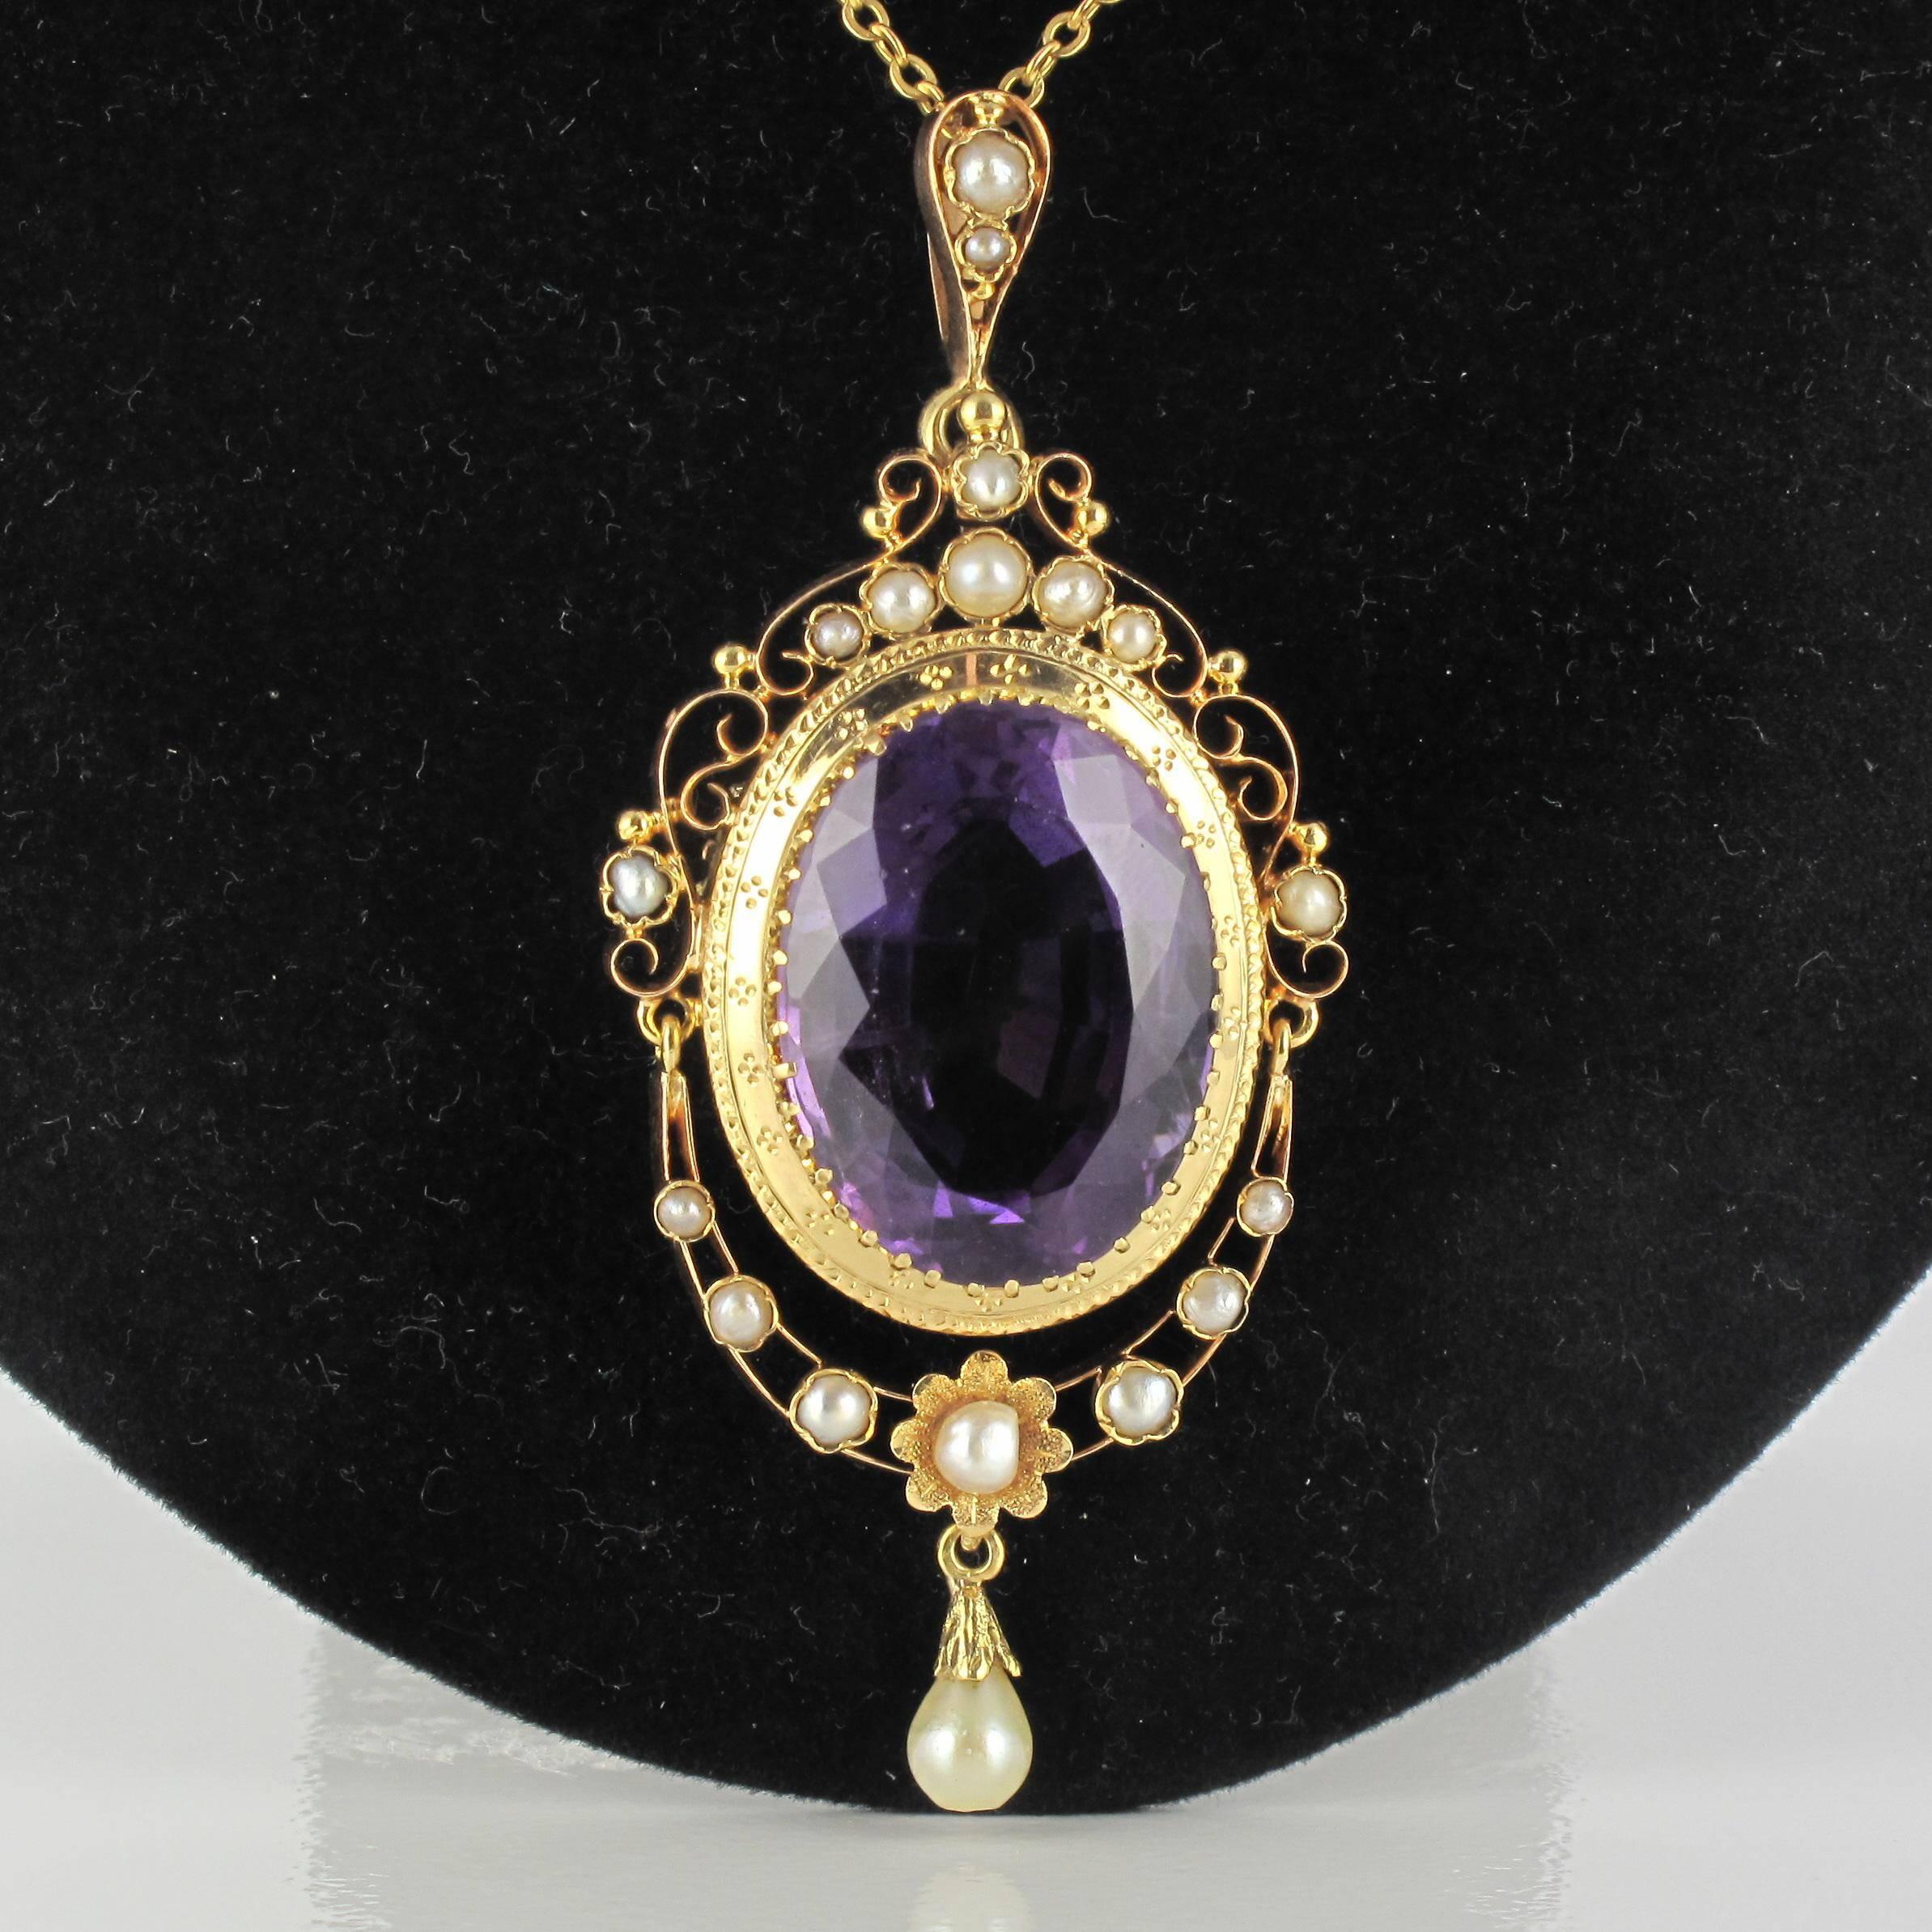 Pendant in 18 carat yellow gold, eagle head hallmark. 

This pendant is part of a set. This splendid antique pendant is composed of a claw set oval amethyst surrounded by fine pearls on an openwork bed. A fine pearl is suspended from the pendant,